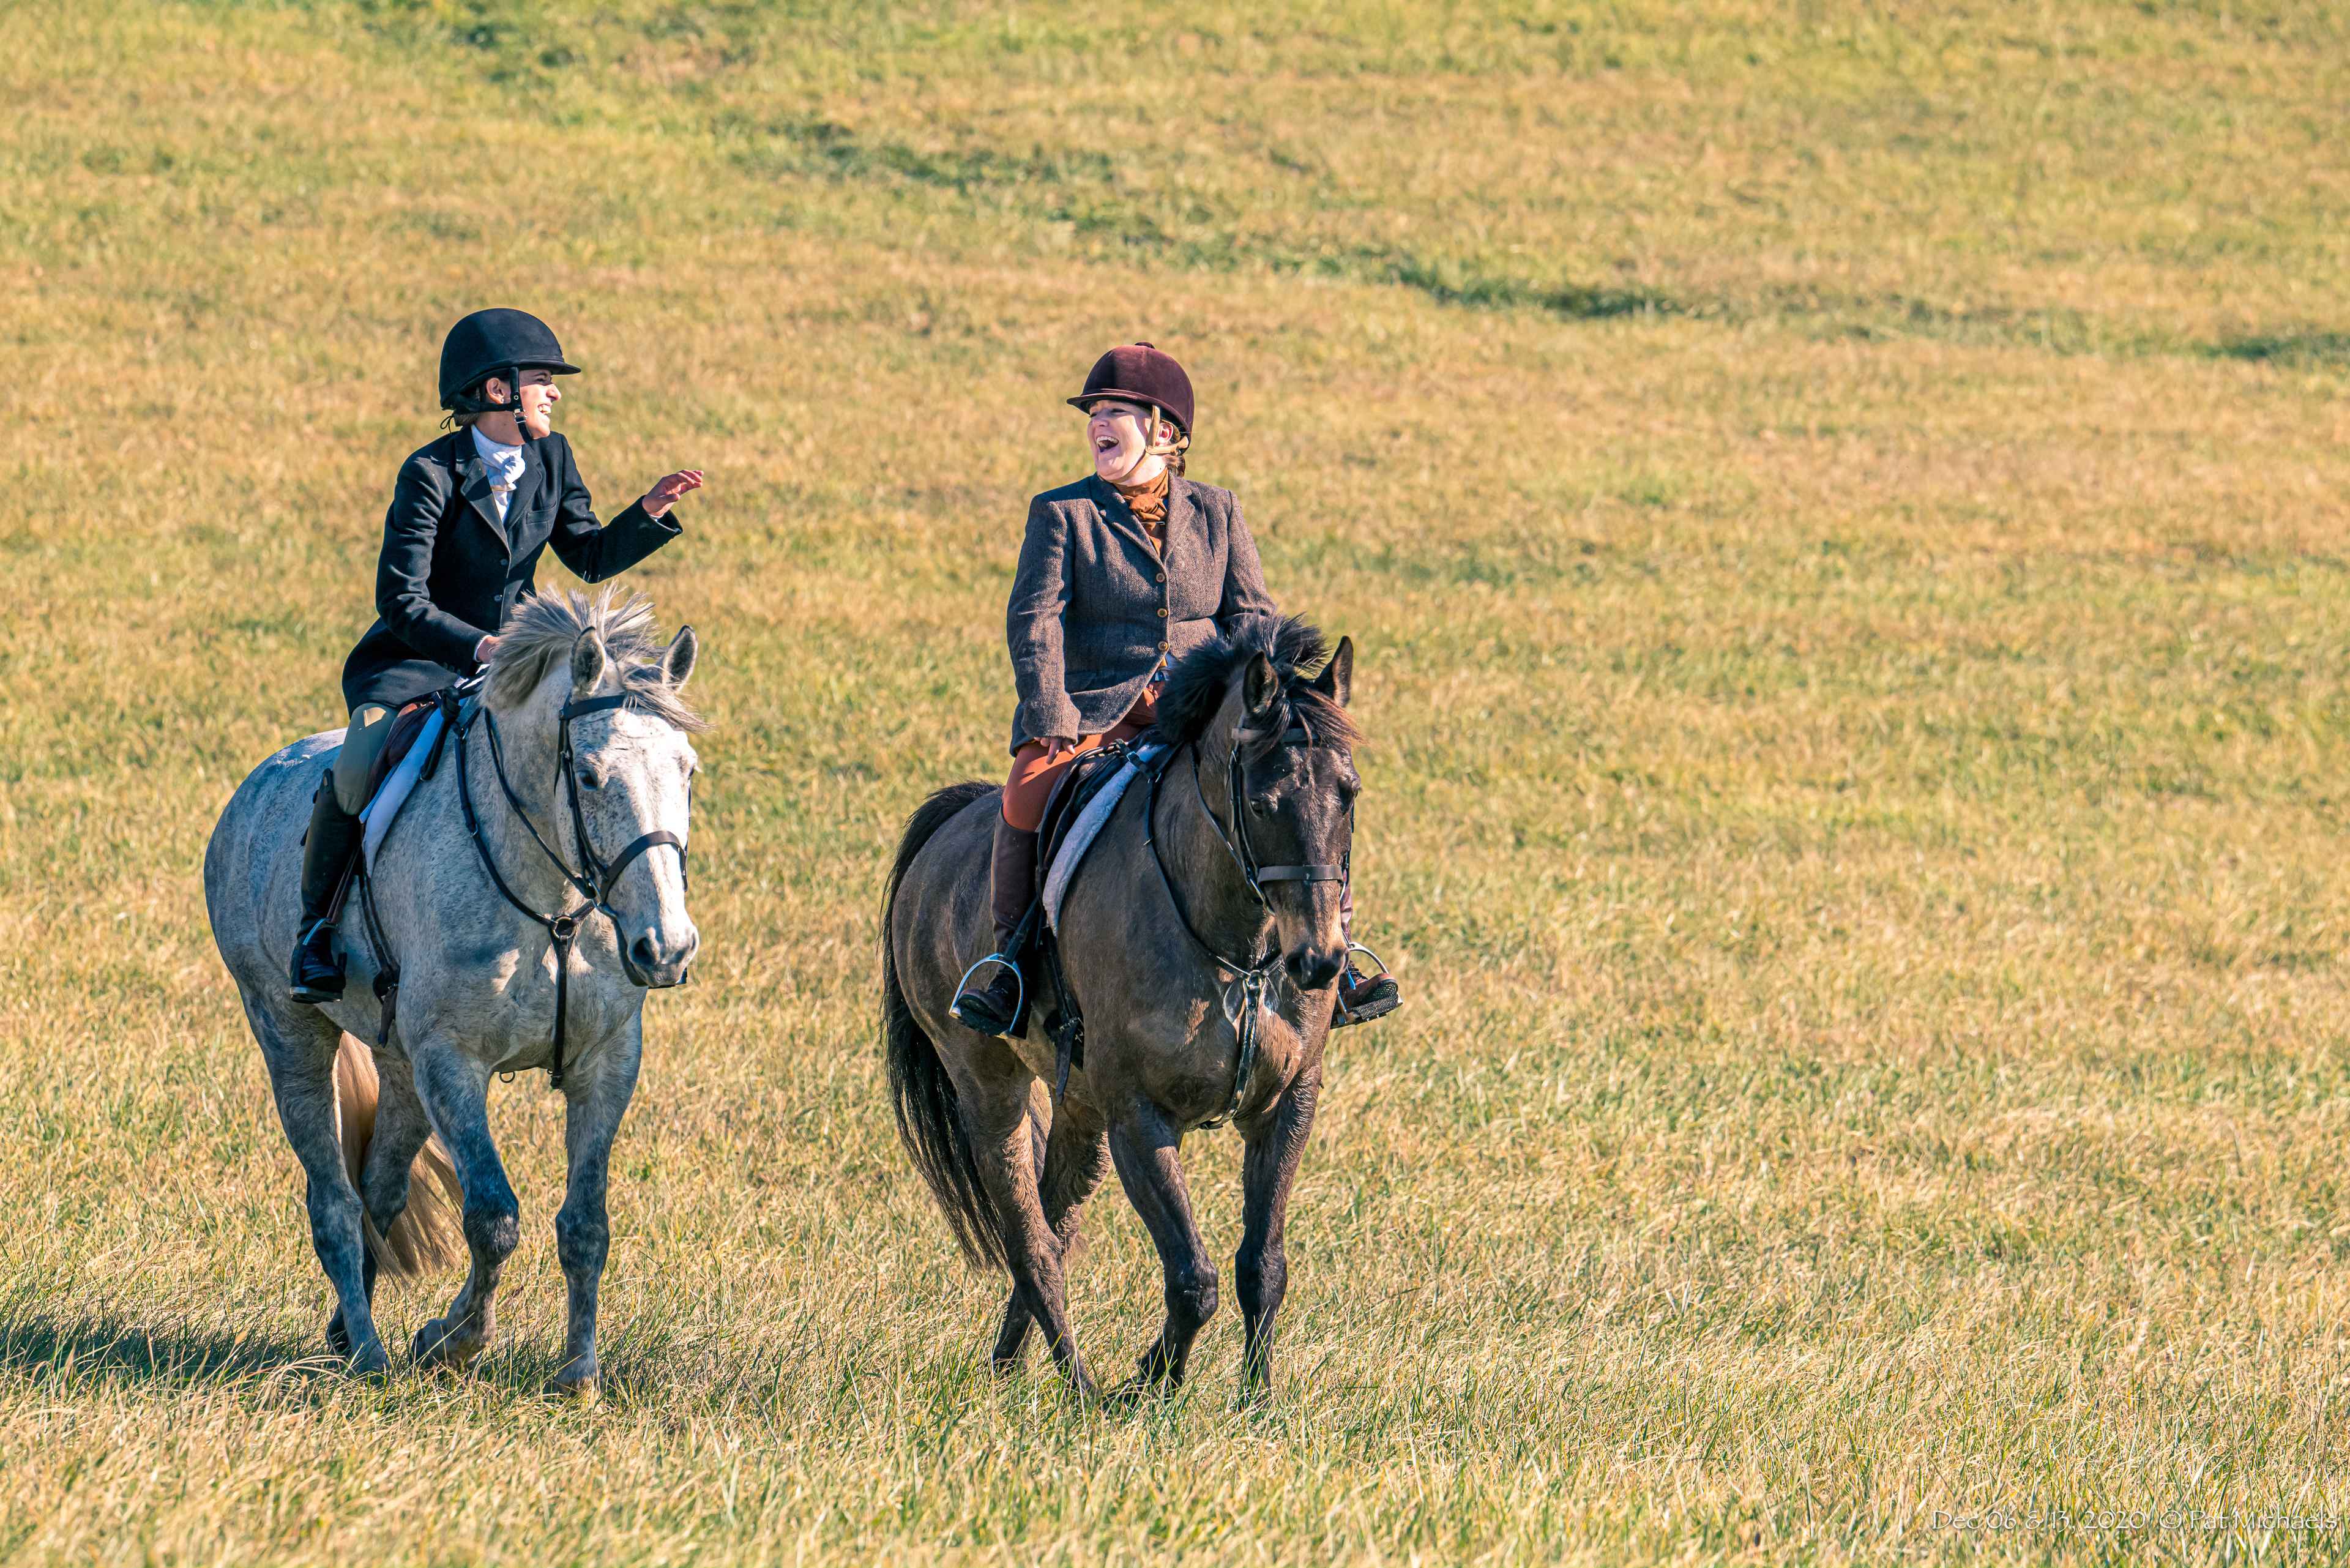 Two riders in a field